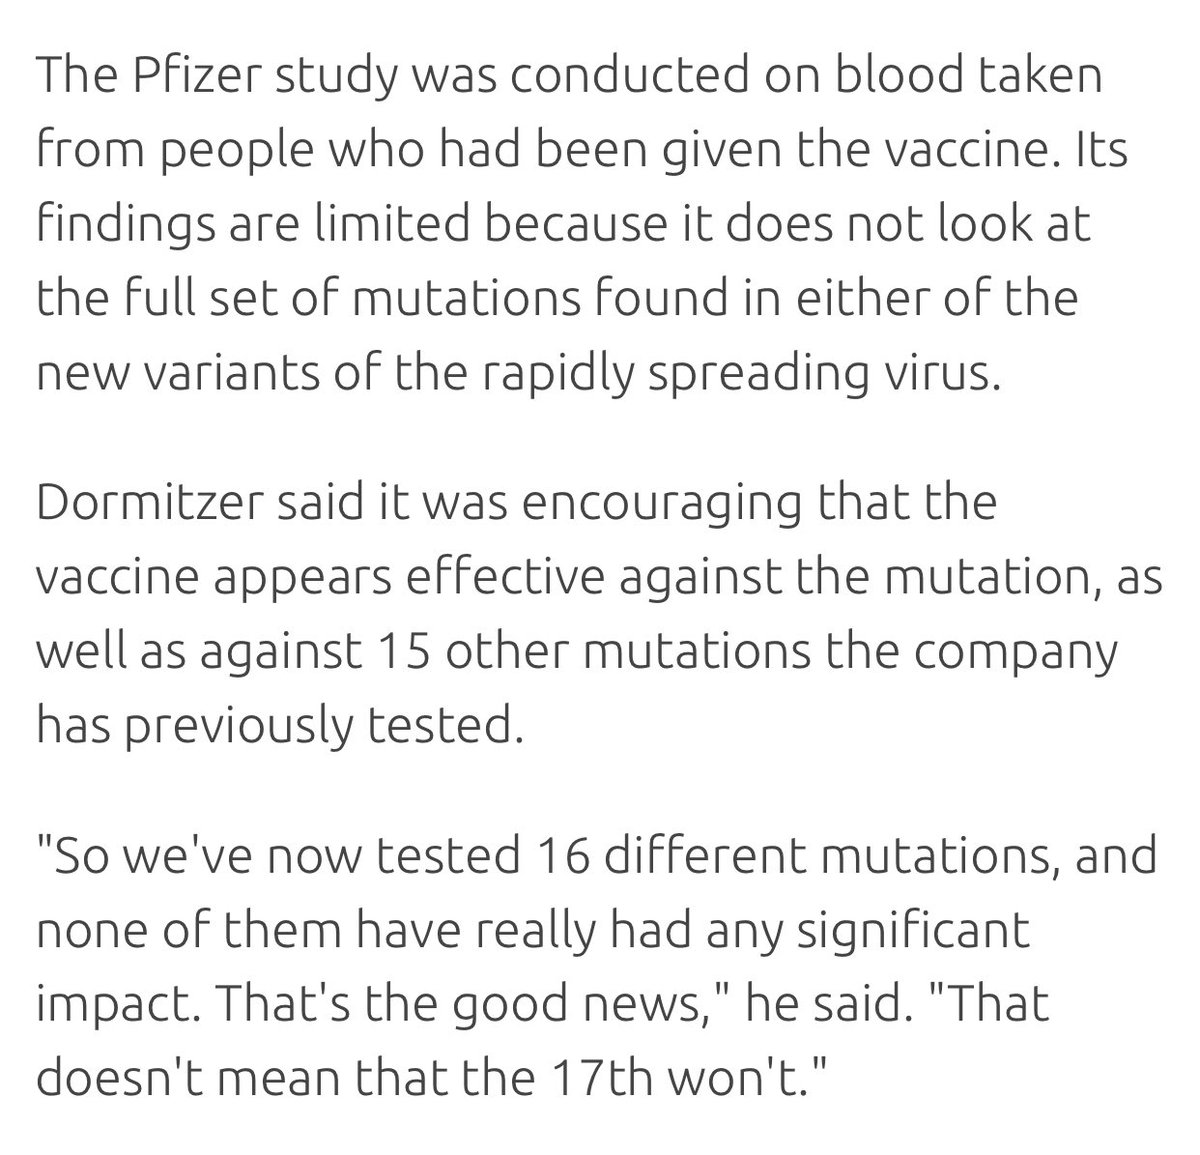 6) scratching my head... Pfizer claims they did a similar study & tested 16 different mutations (from B117) and didn’t find any effect. But they didn’t look at “full set of mutations found”—maybe they didn’t test the full combination like  @GuptaR_lab did.  https://news.trust.org/item/20210108022715-m5obt